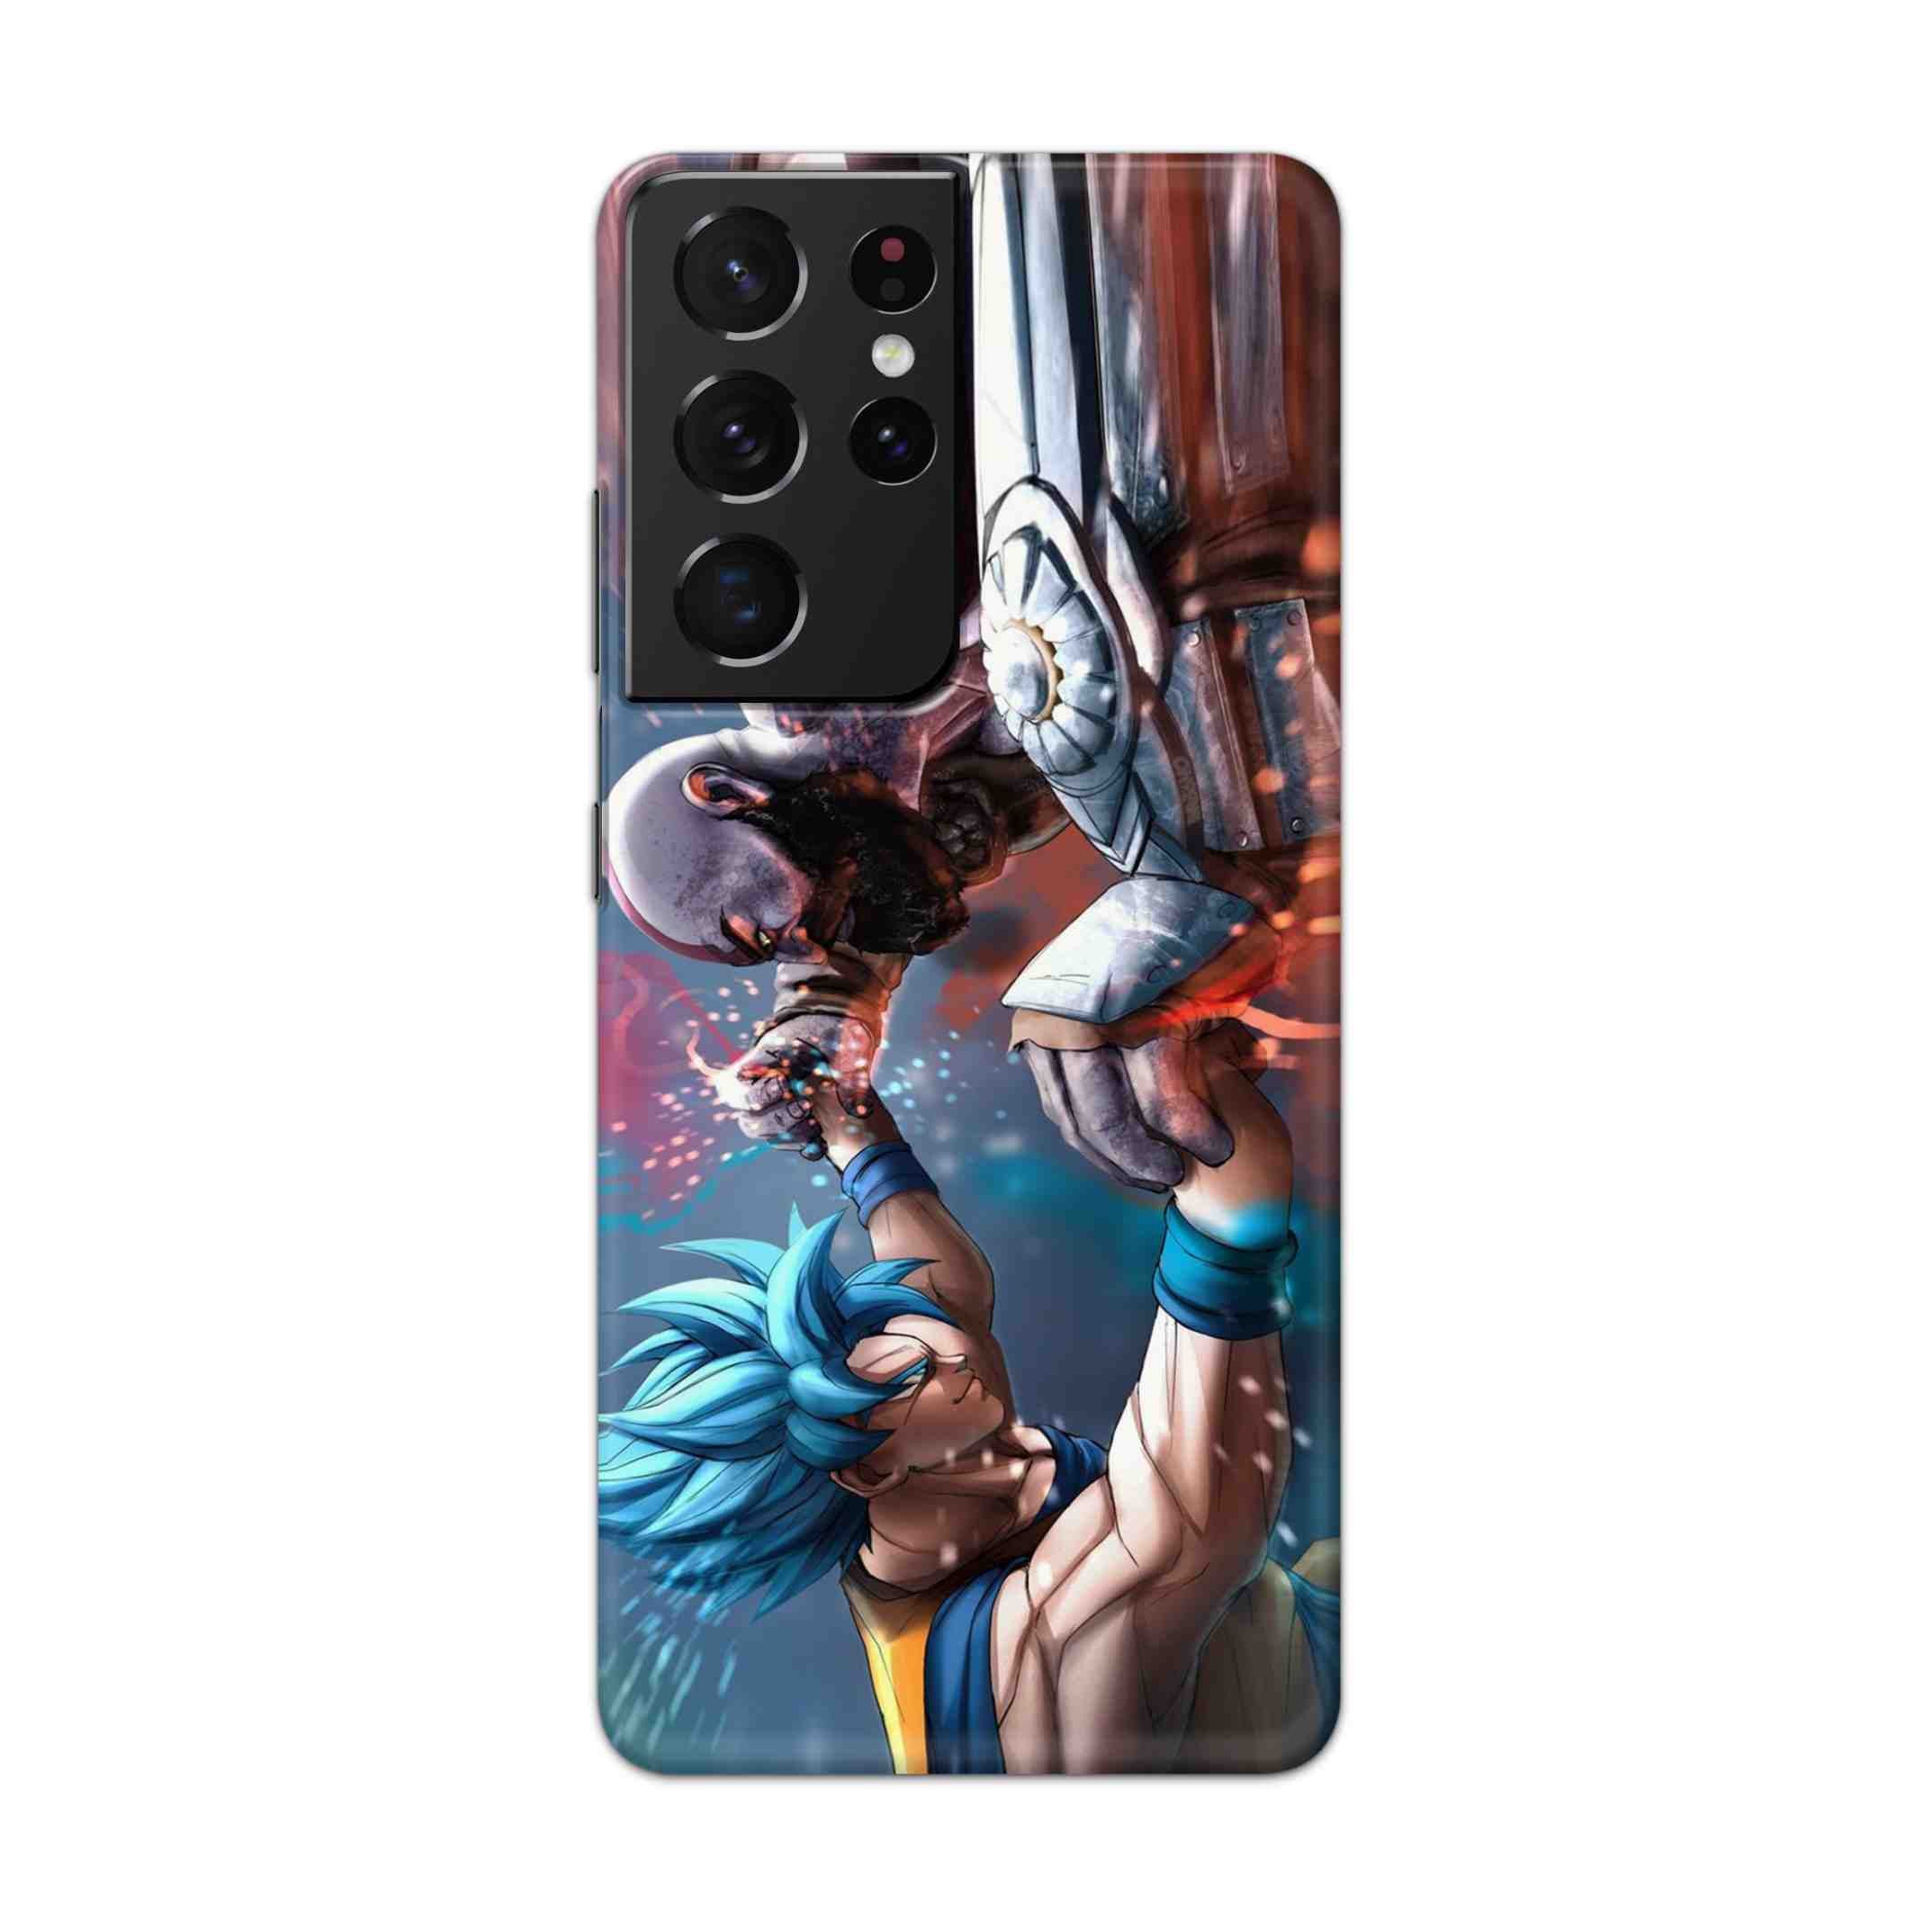 Buy Goku Vs Kratos Hard Back Mobile Phone Case Cover For Samsung Galaxy S21 Ultra Online